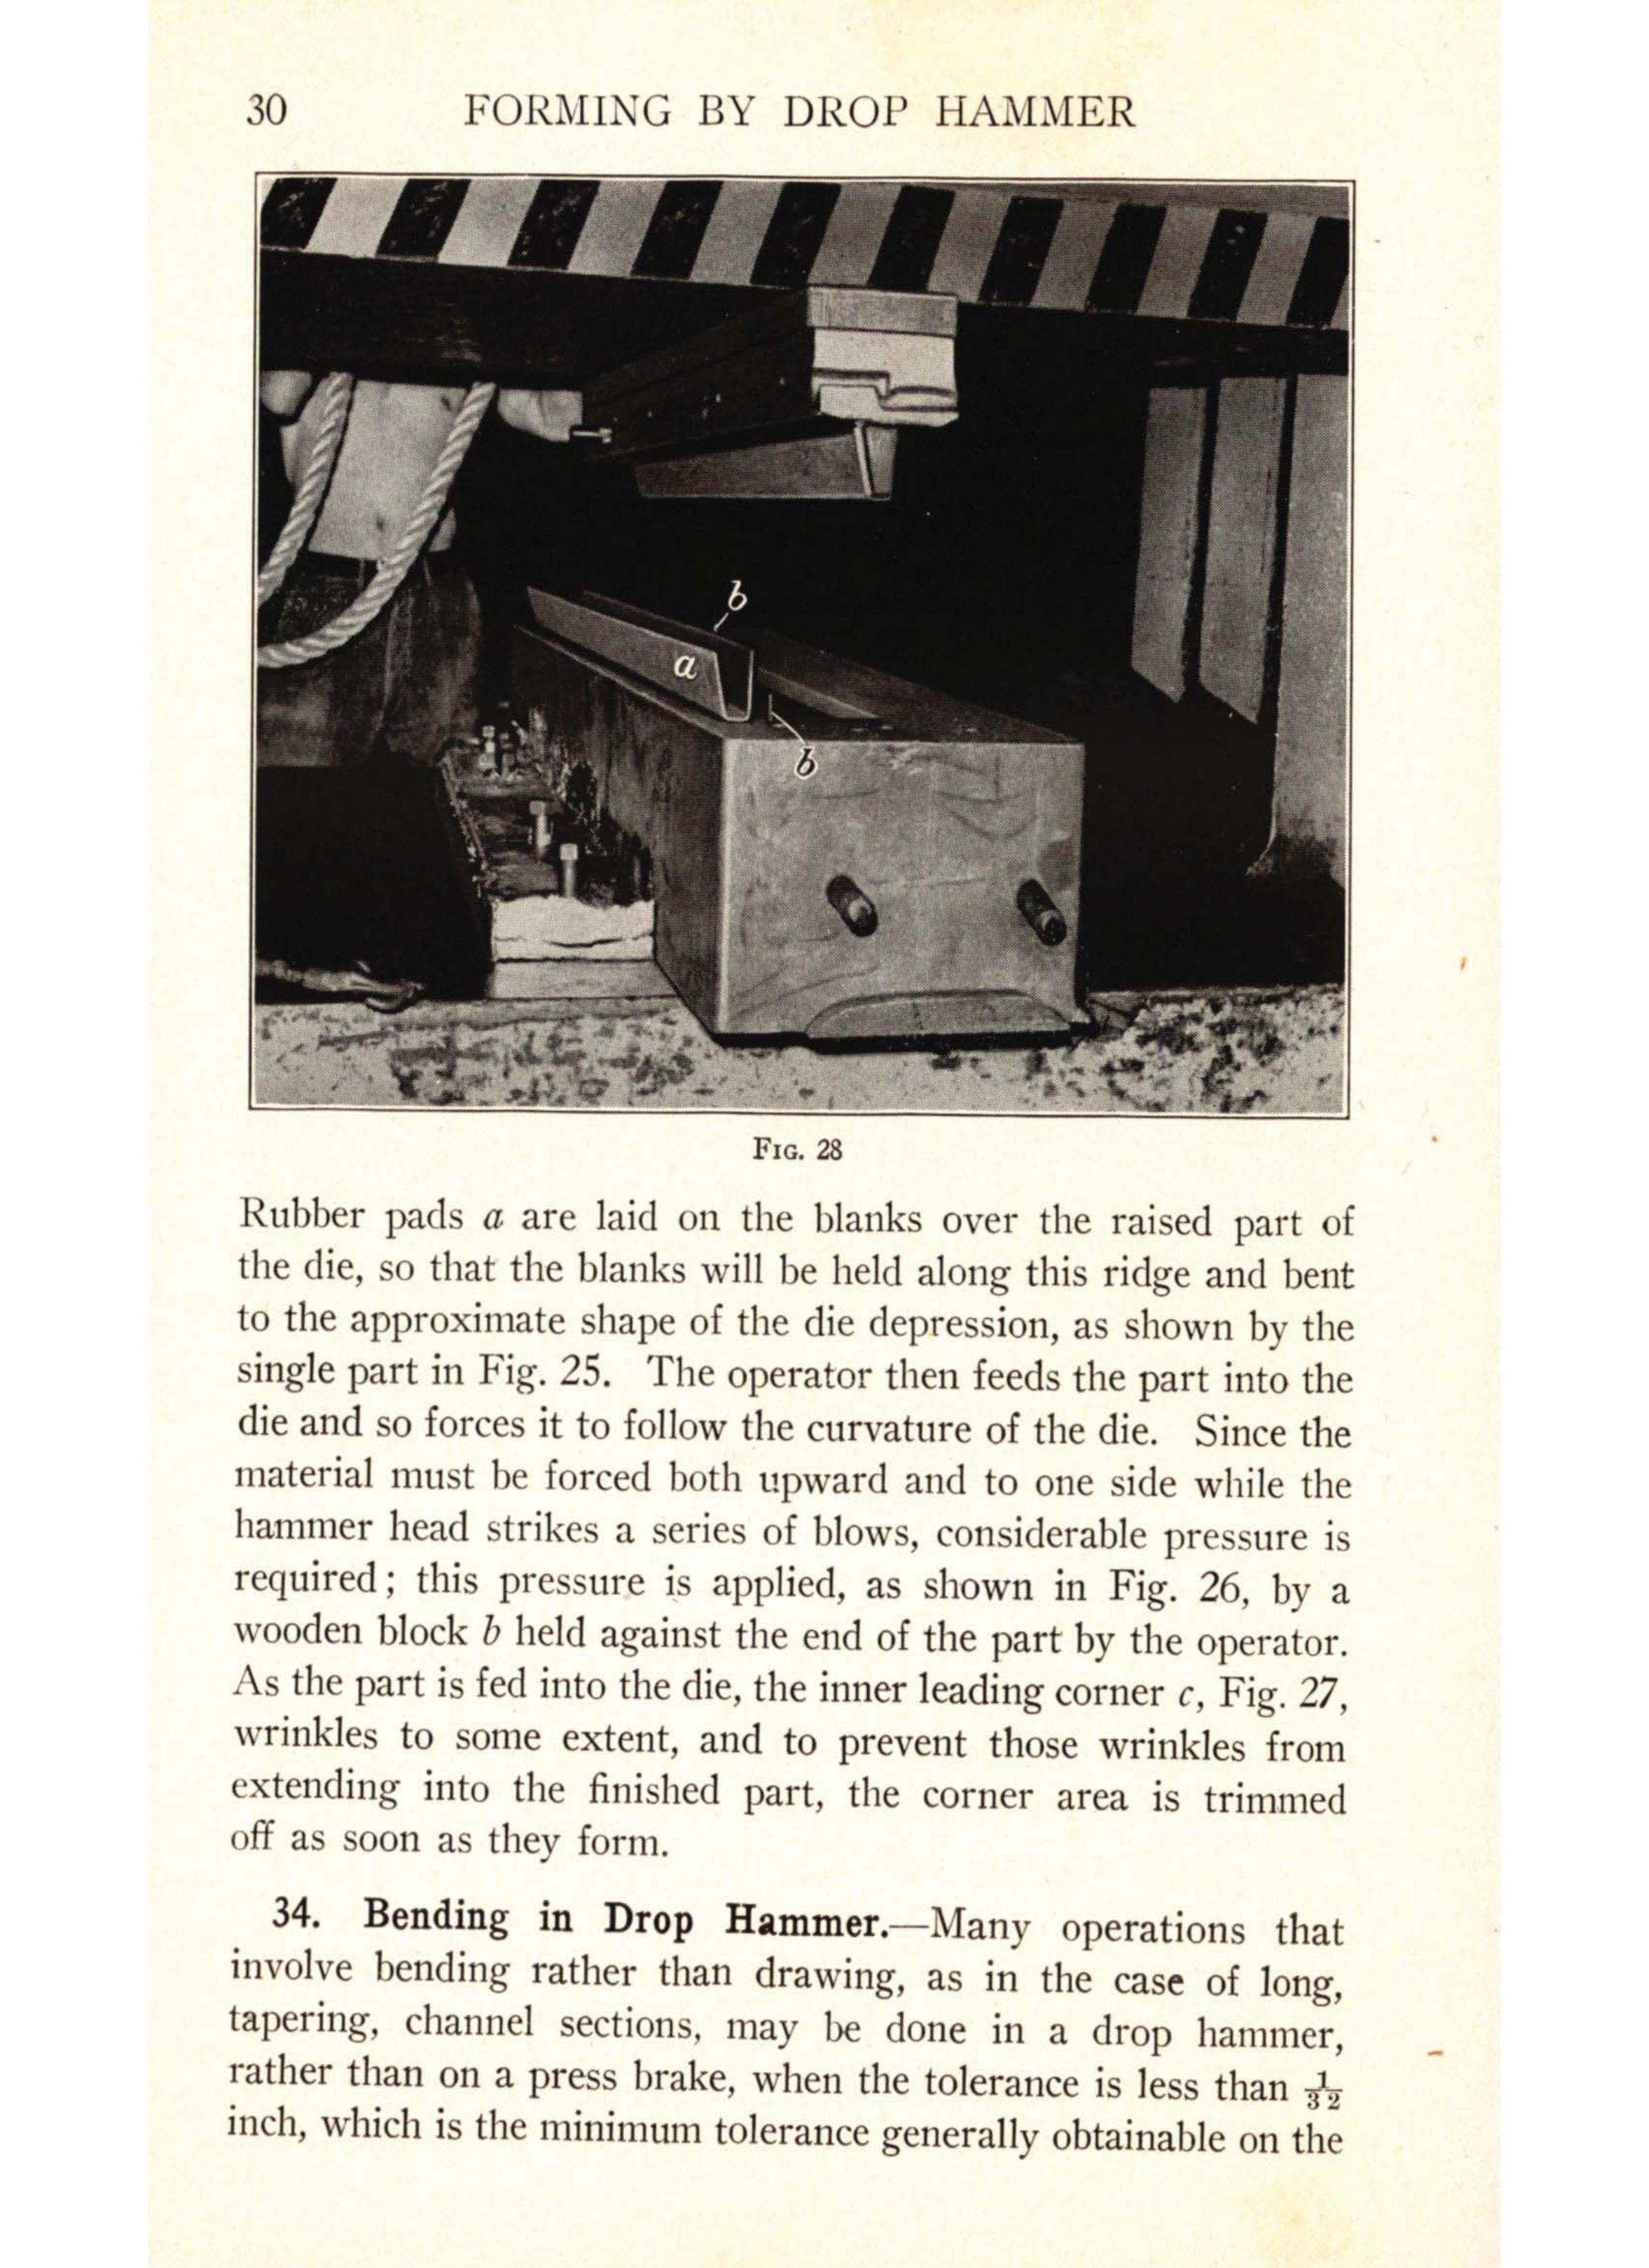 Sample page 32 from AirCorps Library document: Forming Methods - Drop Hammer - Bureau of Aeronautics